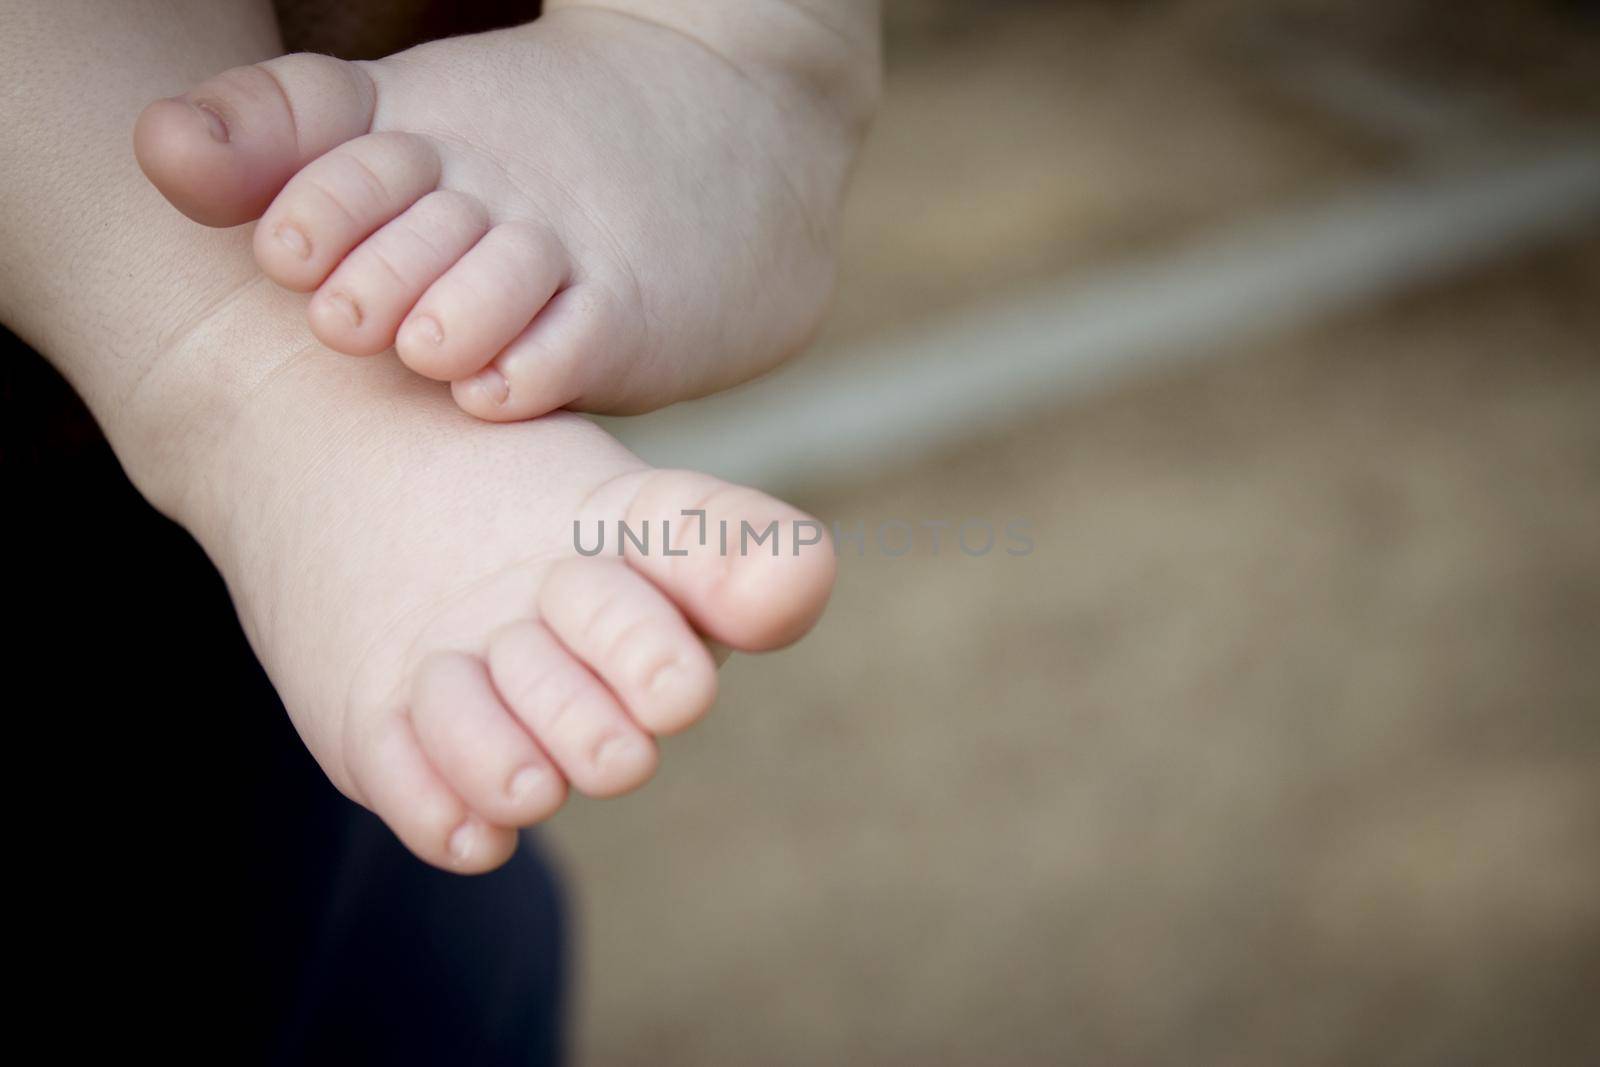 Two month old baby feet on black background. Sweet scene